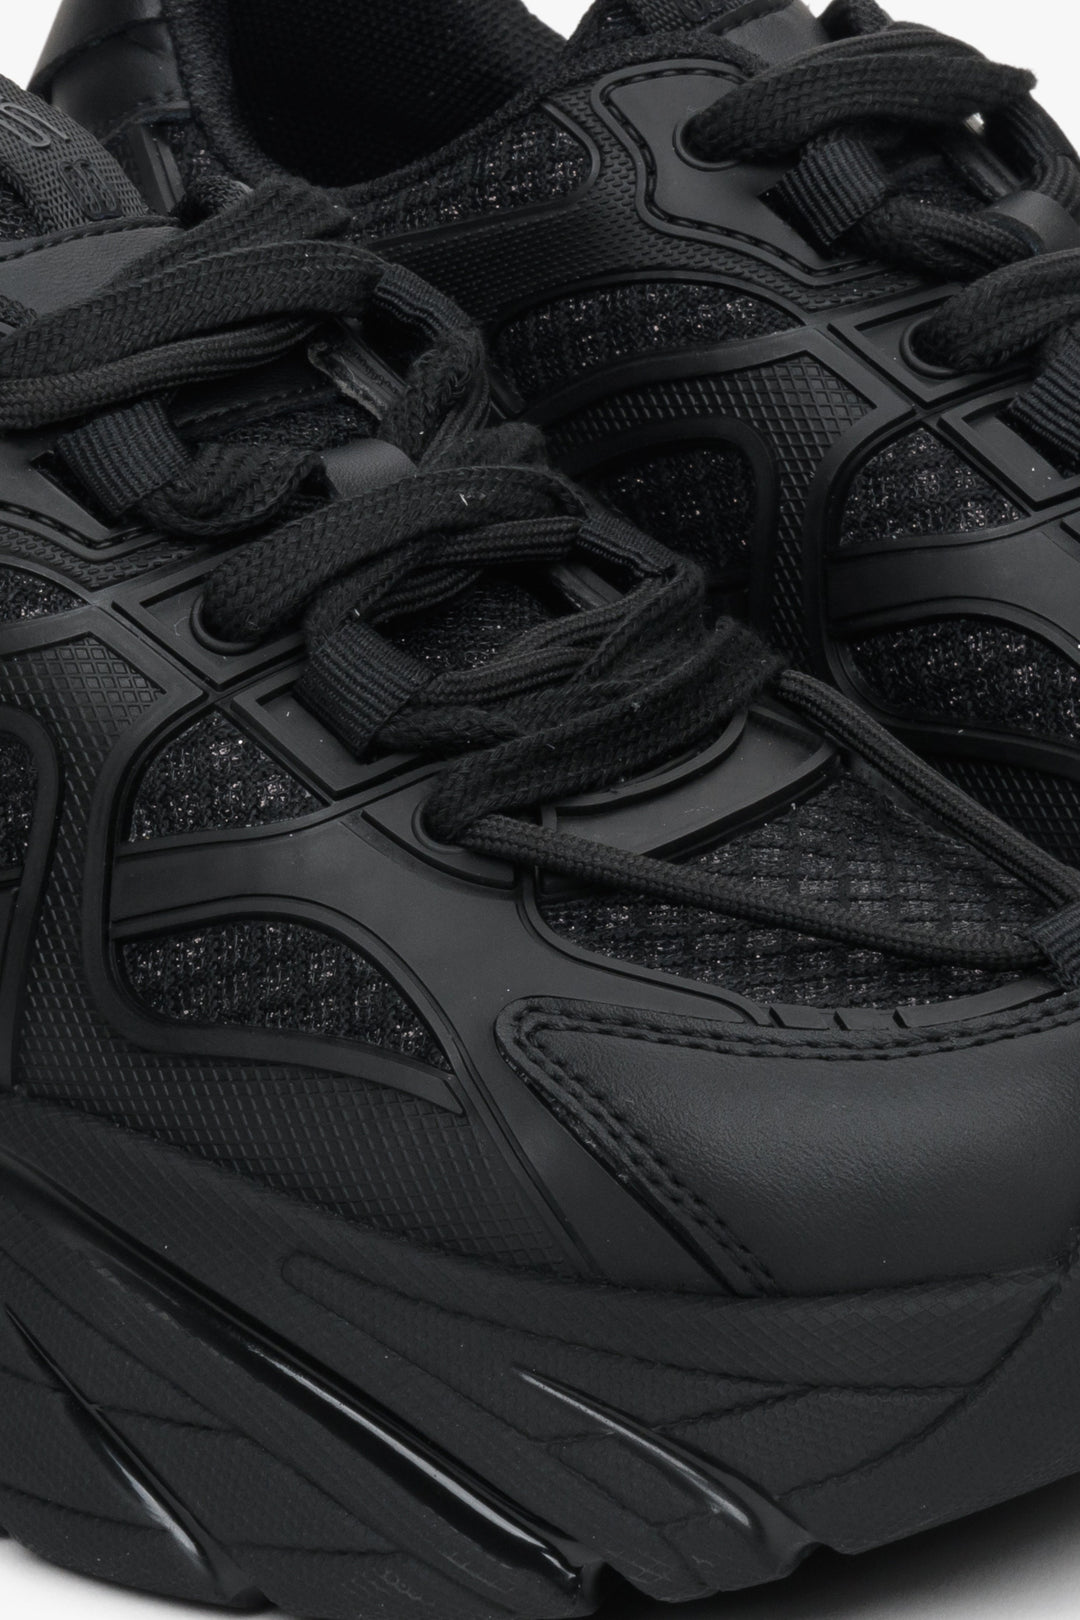 Women's black sneakers ES 8 - close-up of the details.